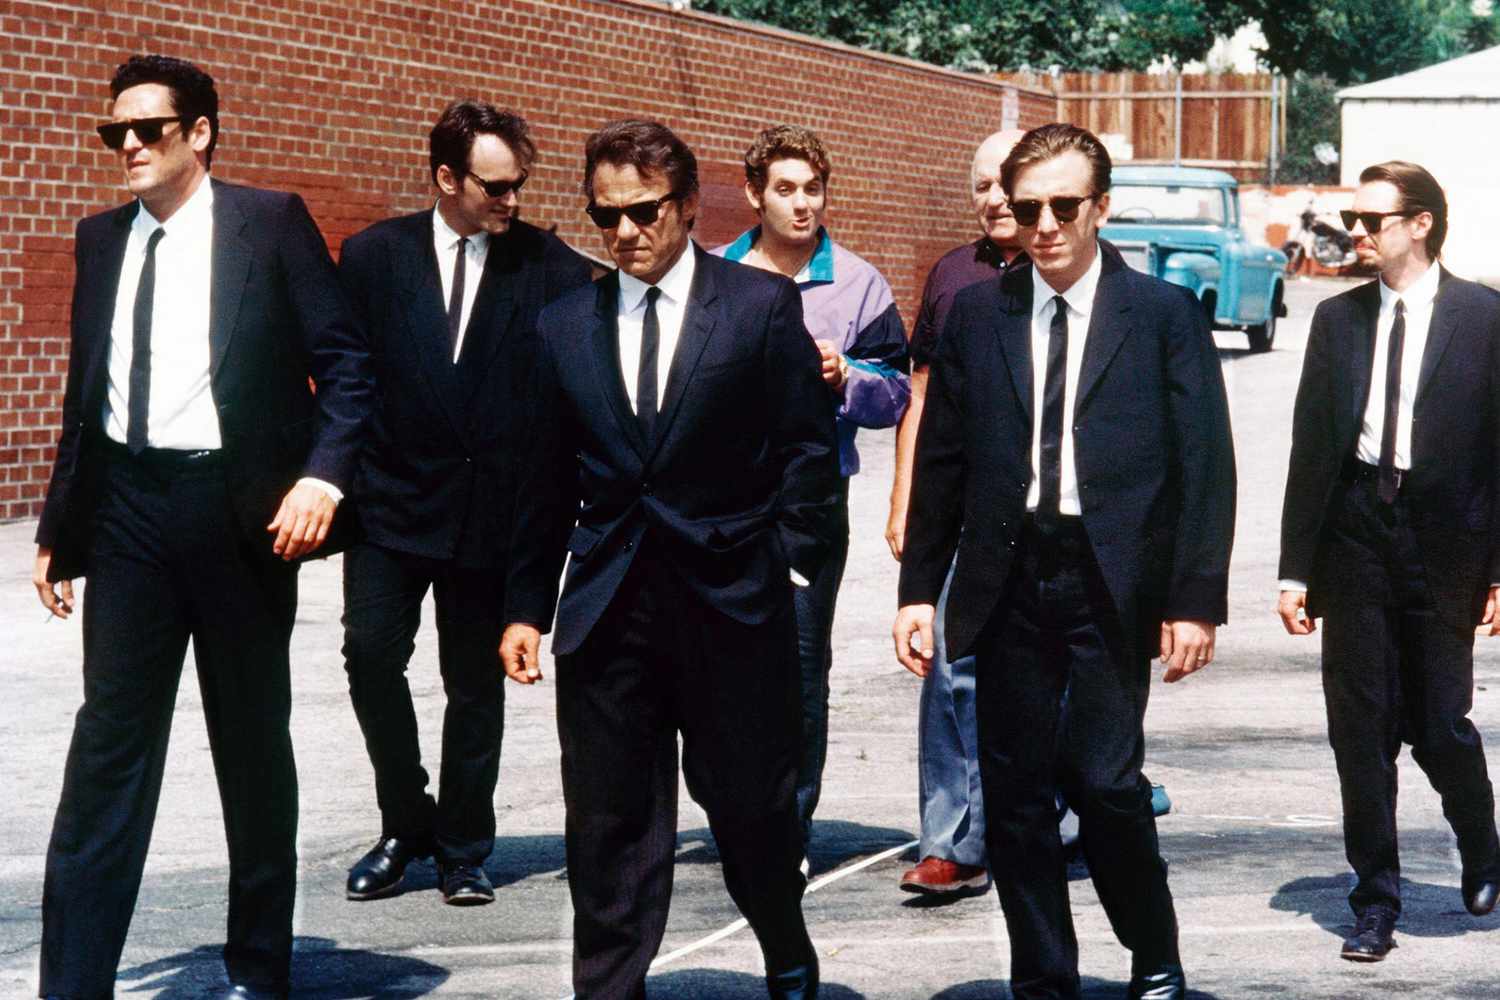 Michael Madsen, Quentin Tarantino, Harvey Keitel, Christopher Penn, Lawrence Tierne, Tim Roth, and Steve Buscemi in 'Reservoir Dogs'